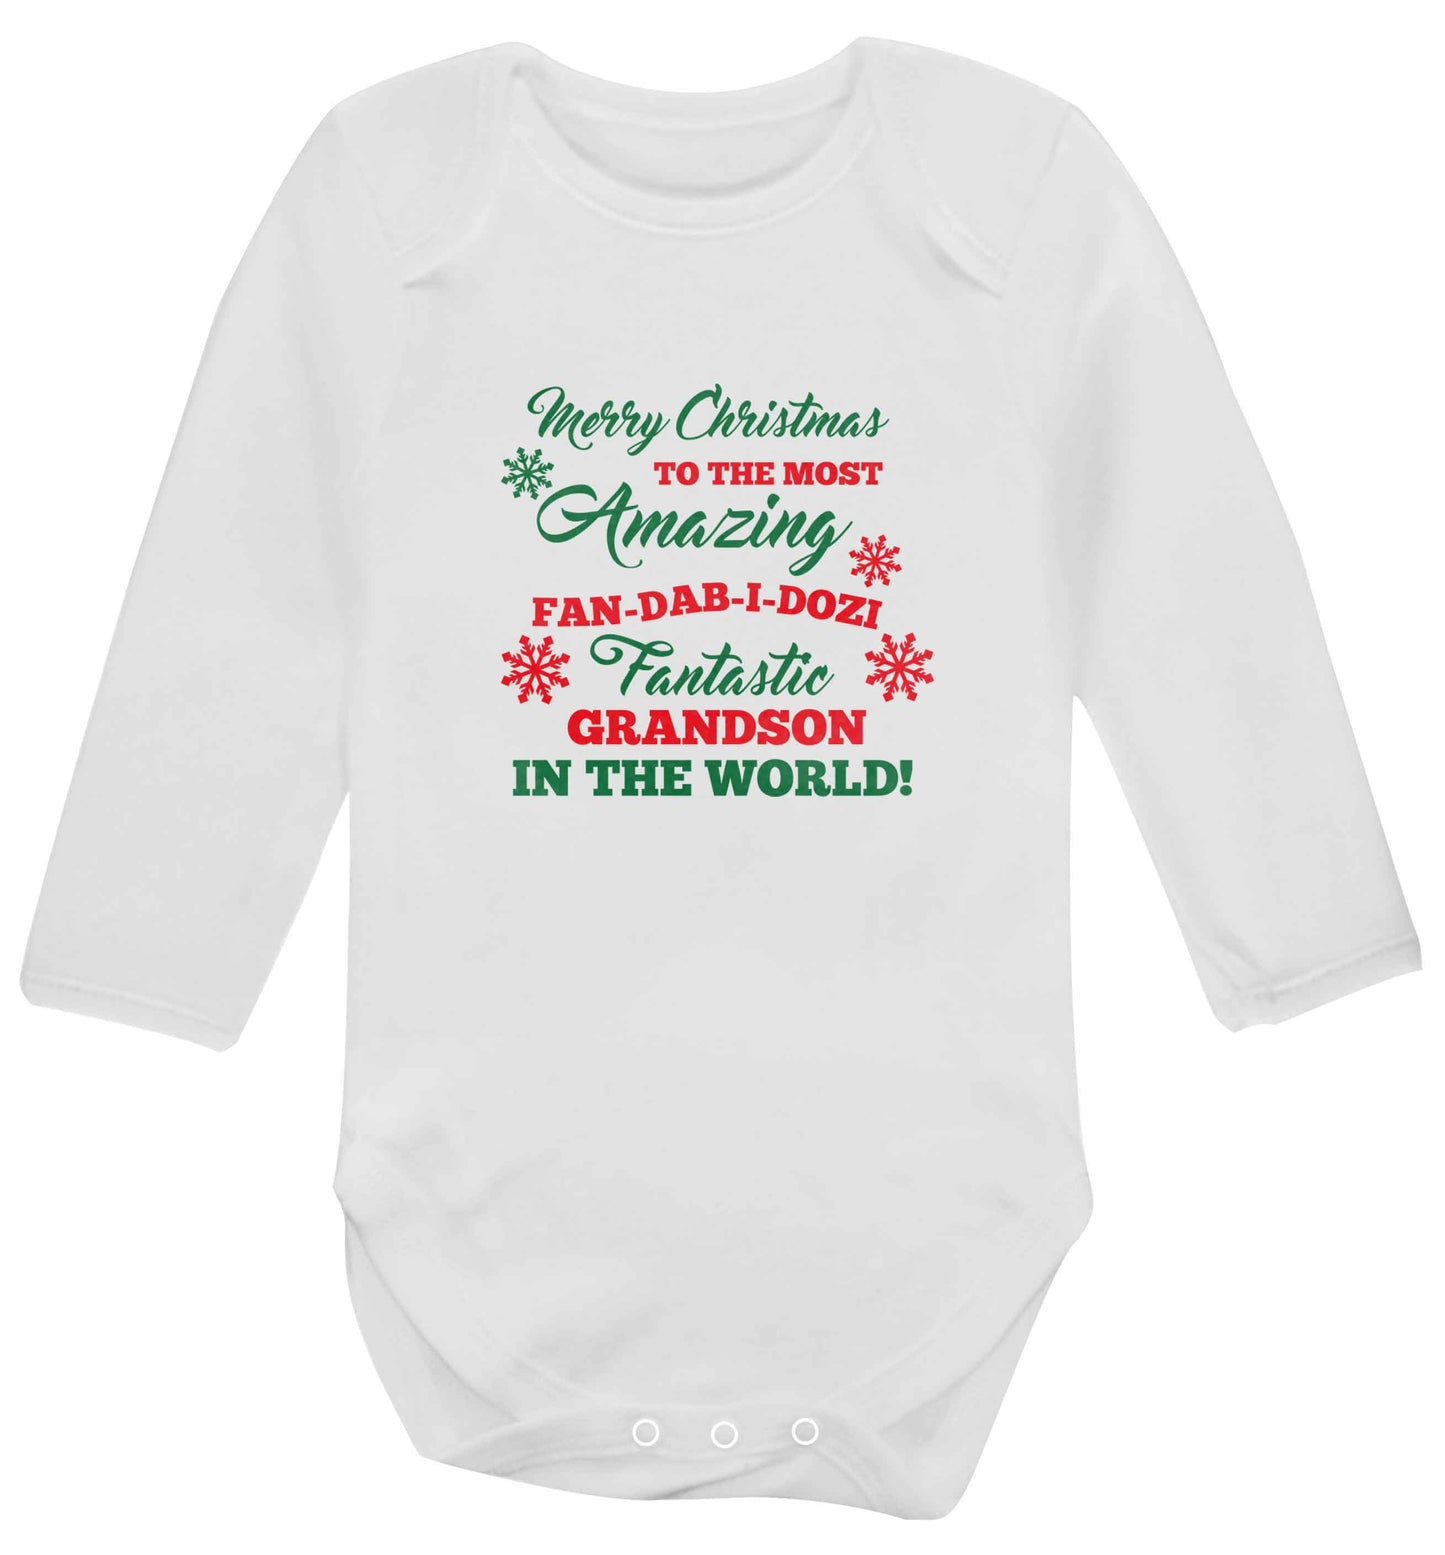 Merry Christmas to the most amazing fan-dab-i-dozi fantasic Grandson in the world baby vest long sleeved white 6-12 months